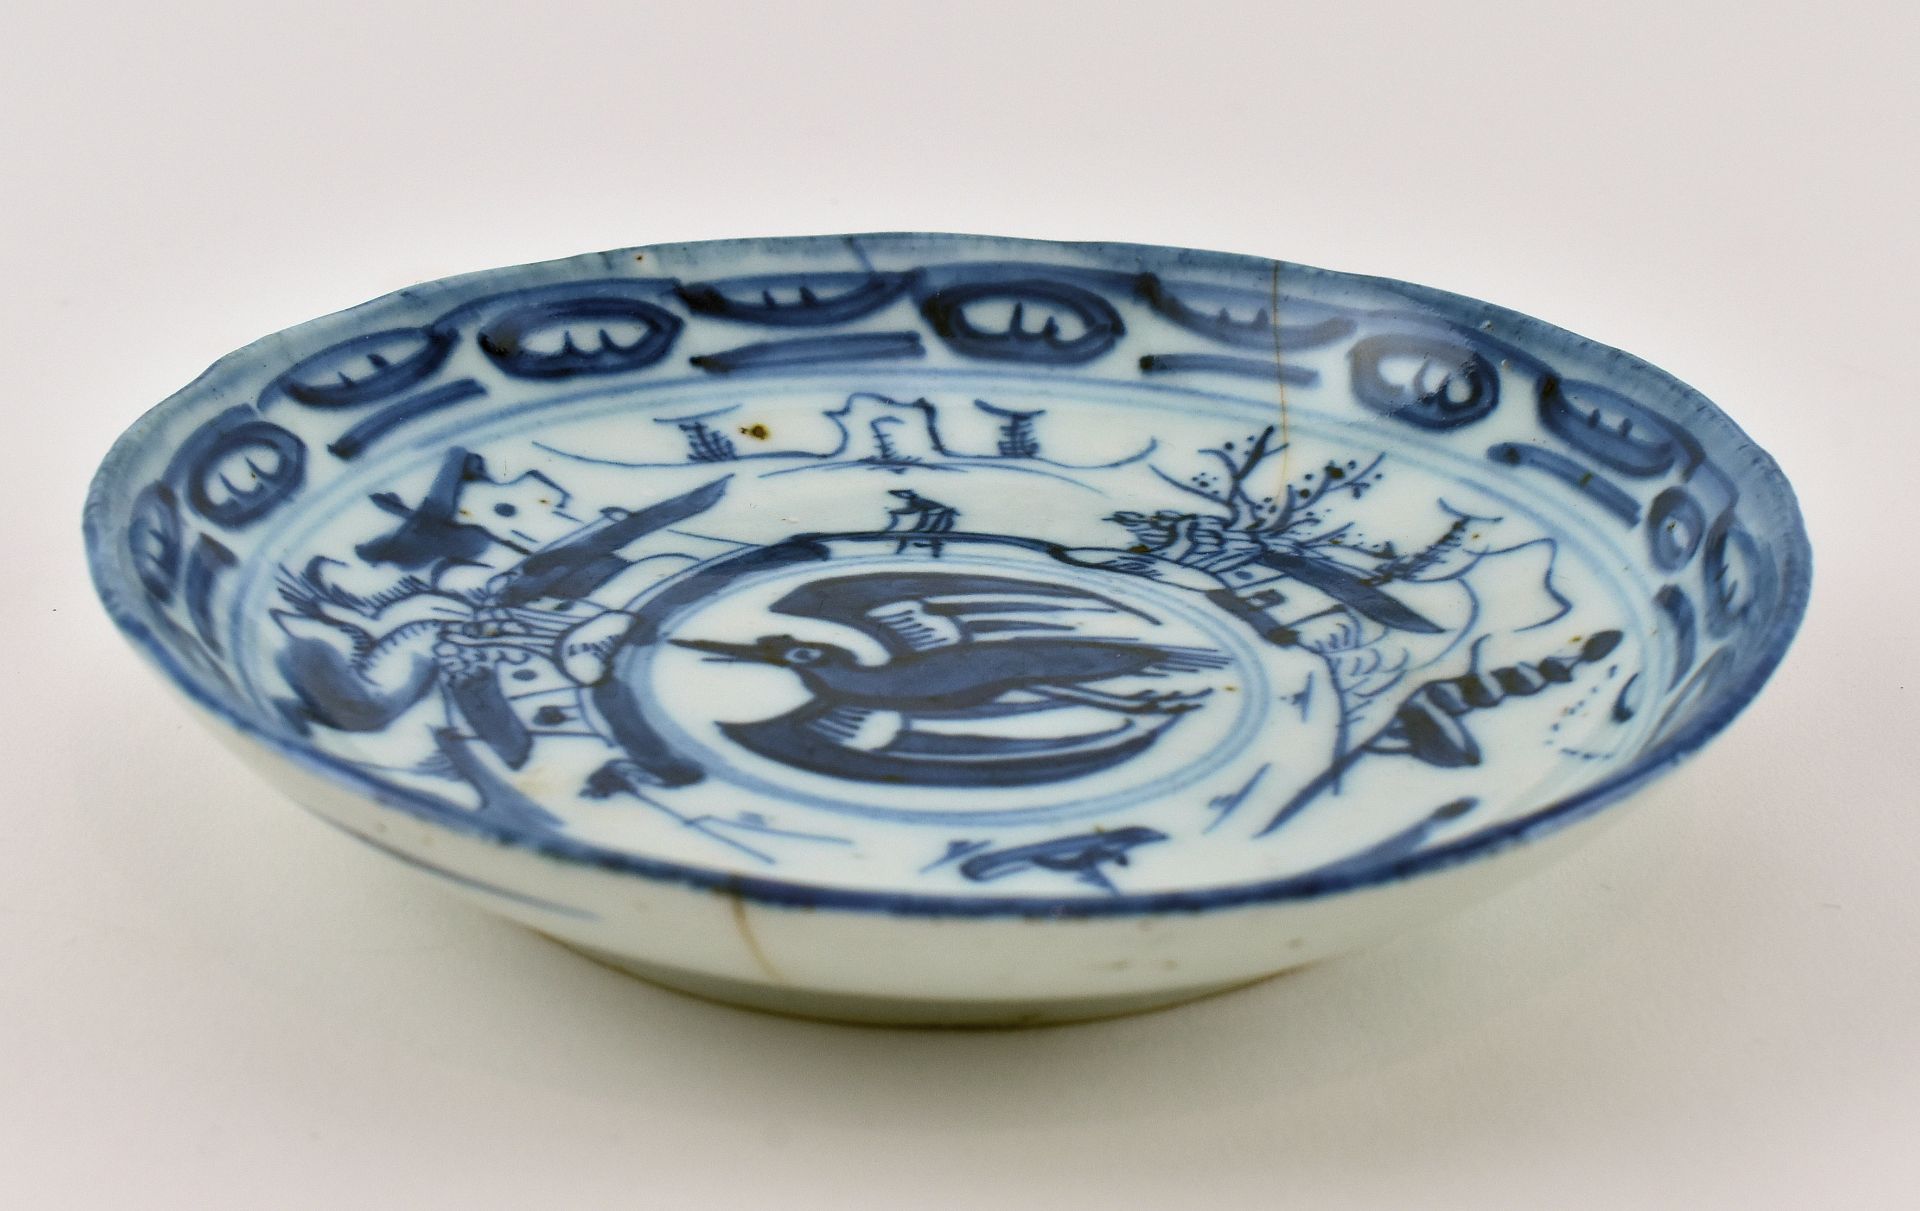 QING DAOGUANG BLUE AND WHITE PLATE 清 道光 青花山水盘 - Bild 4 aus 8